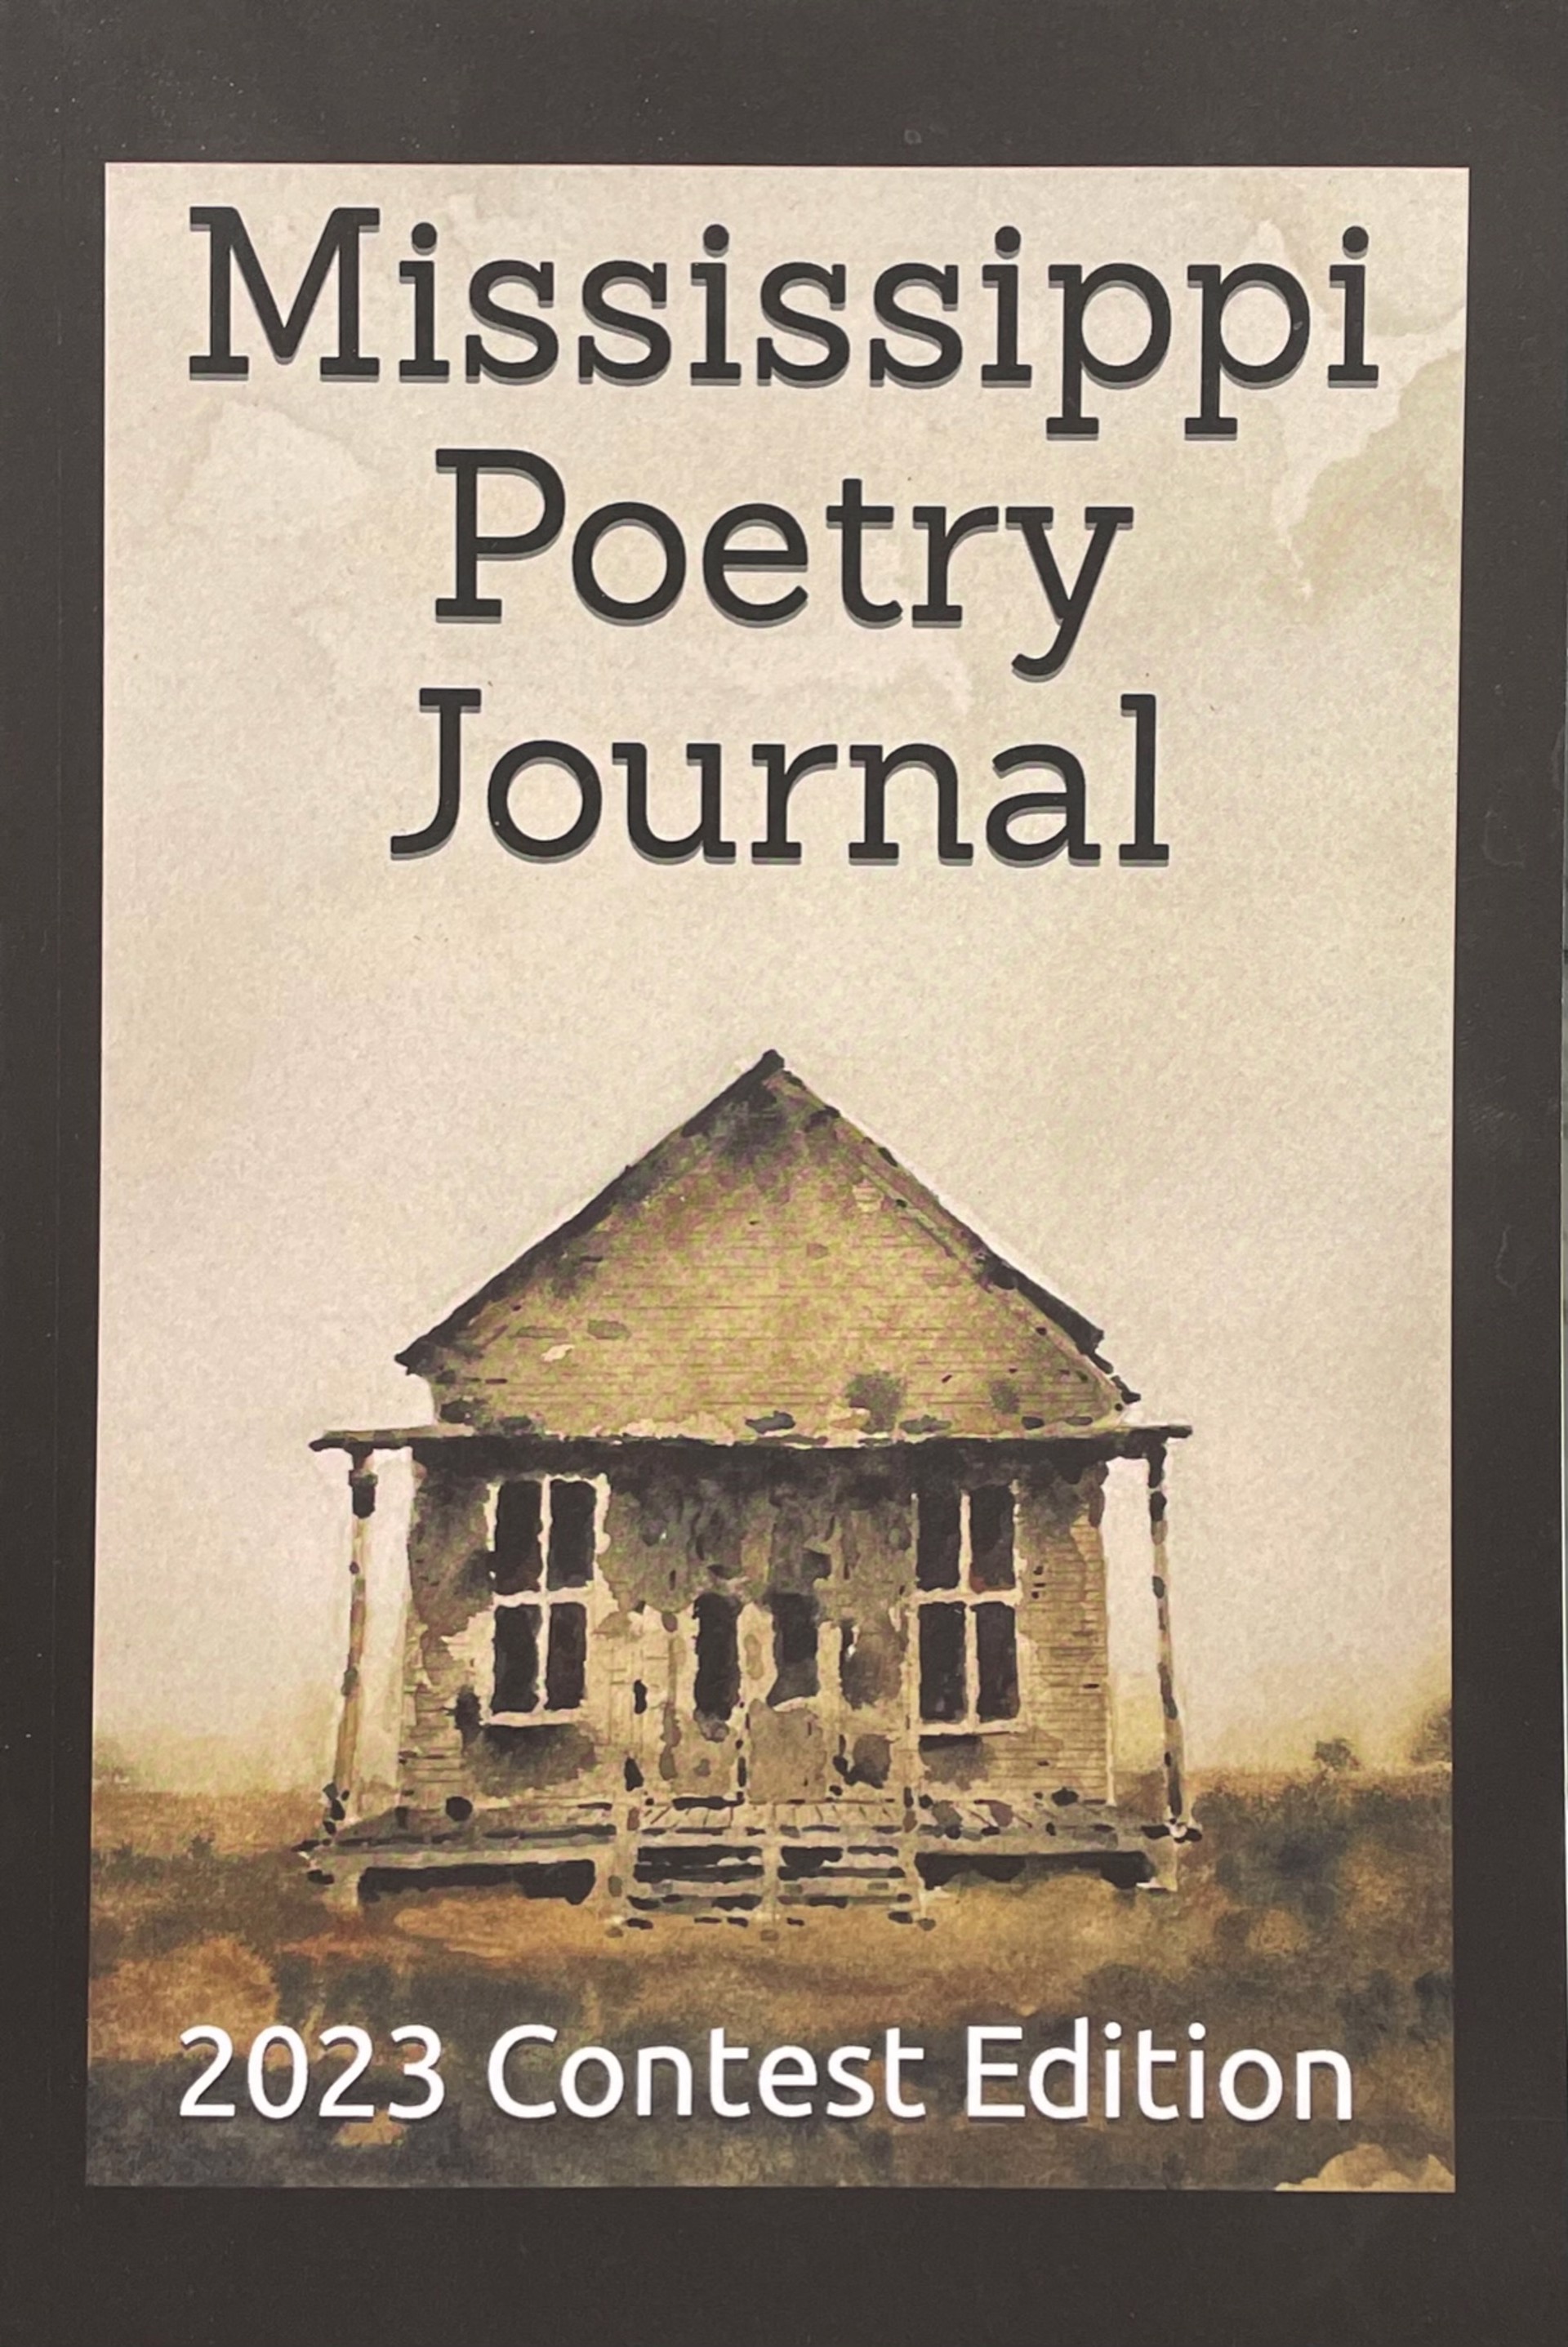 Mississippi Poetry Journal 2023 Contest Edition by Pacesetter Merchandise